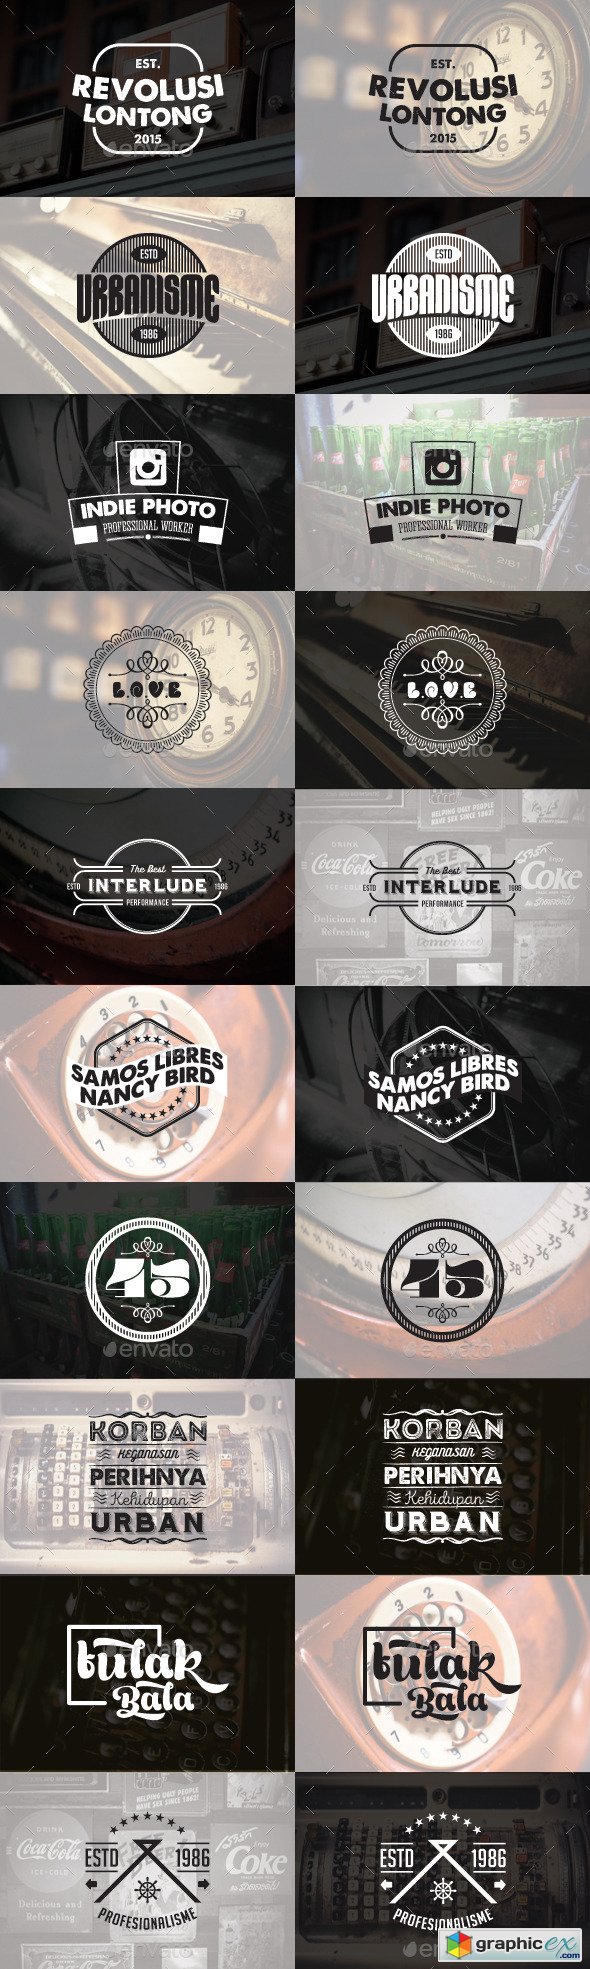 10 Badges and Stickers - Vol 4